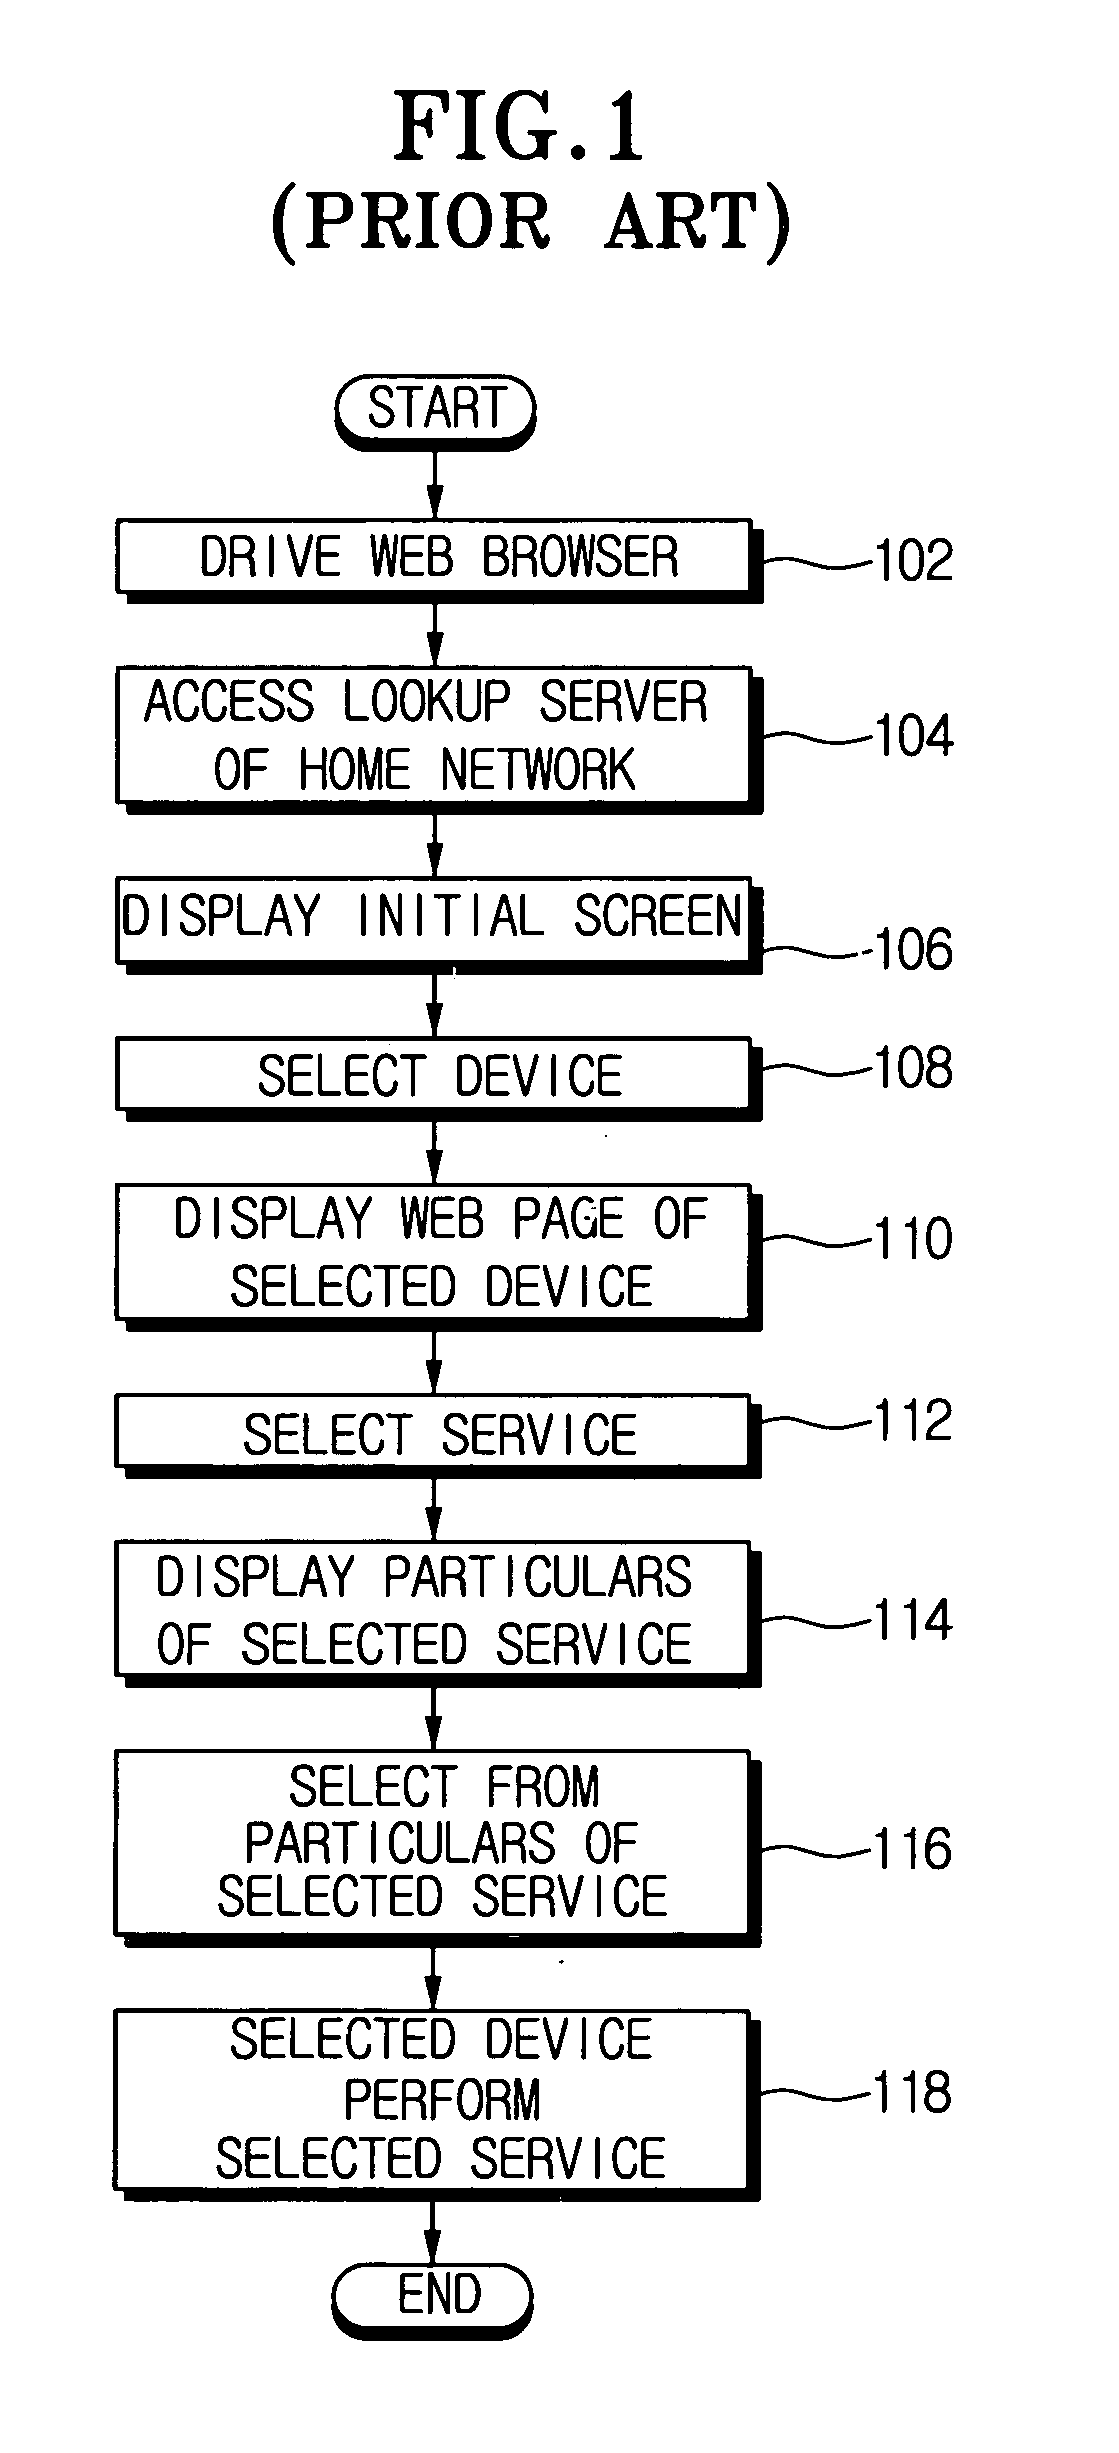 Apparatus and method for controlling a device in a home network based upon a batch command that is generated when a name of the batch command, a name of the device, a service of the device and details related to the service are sequentially selected